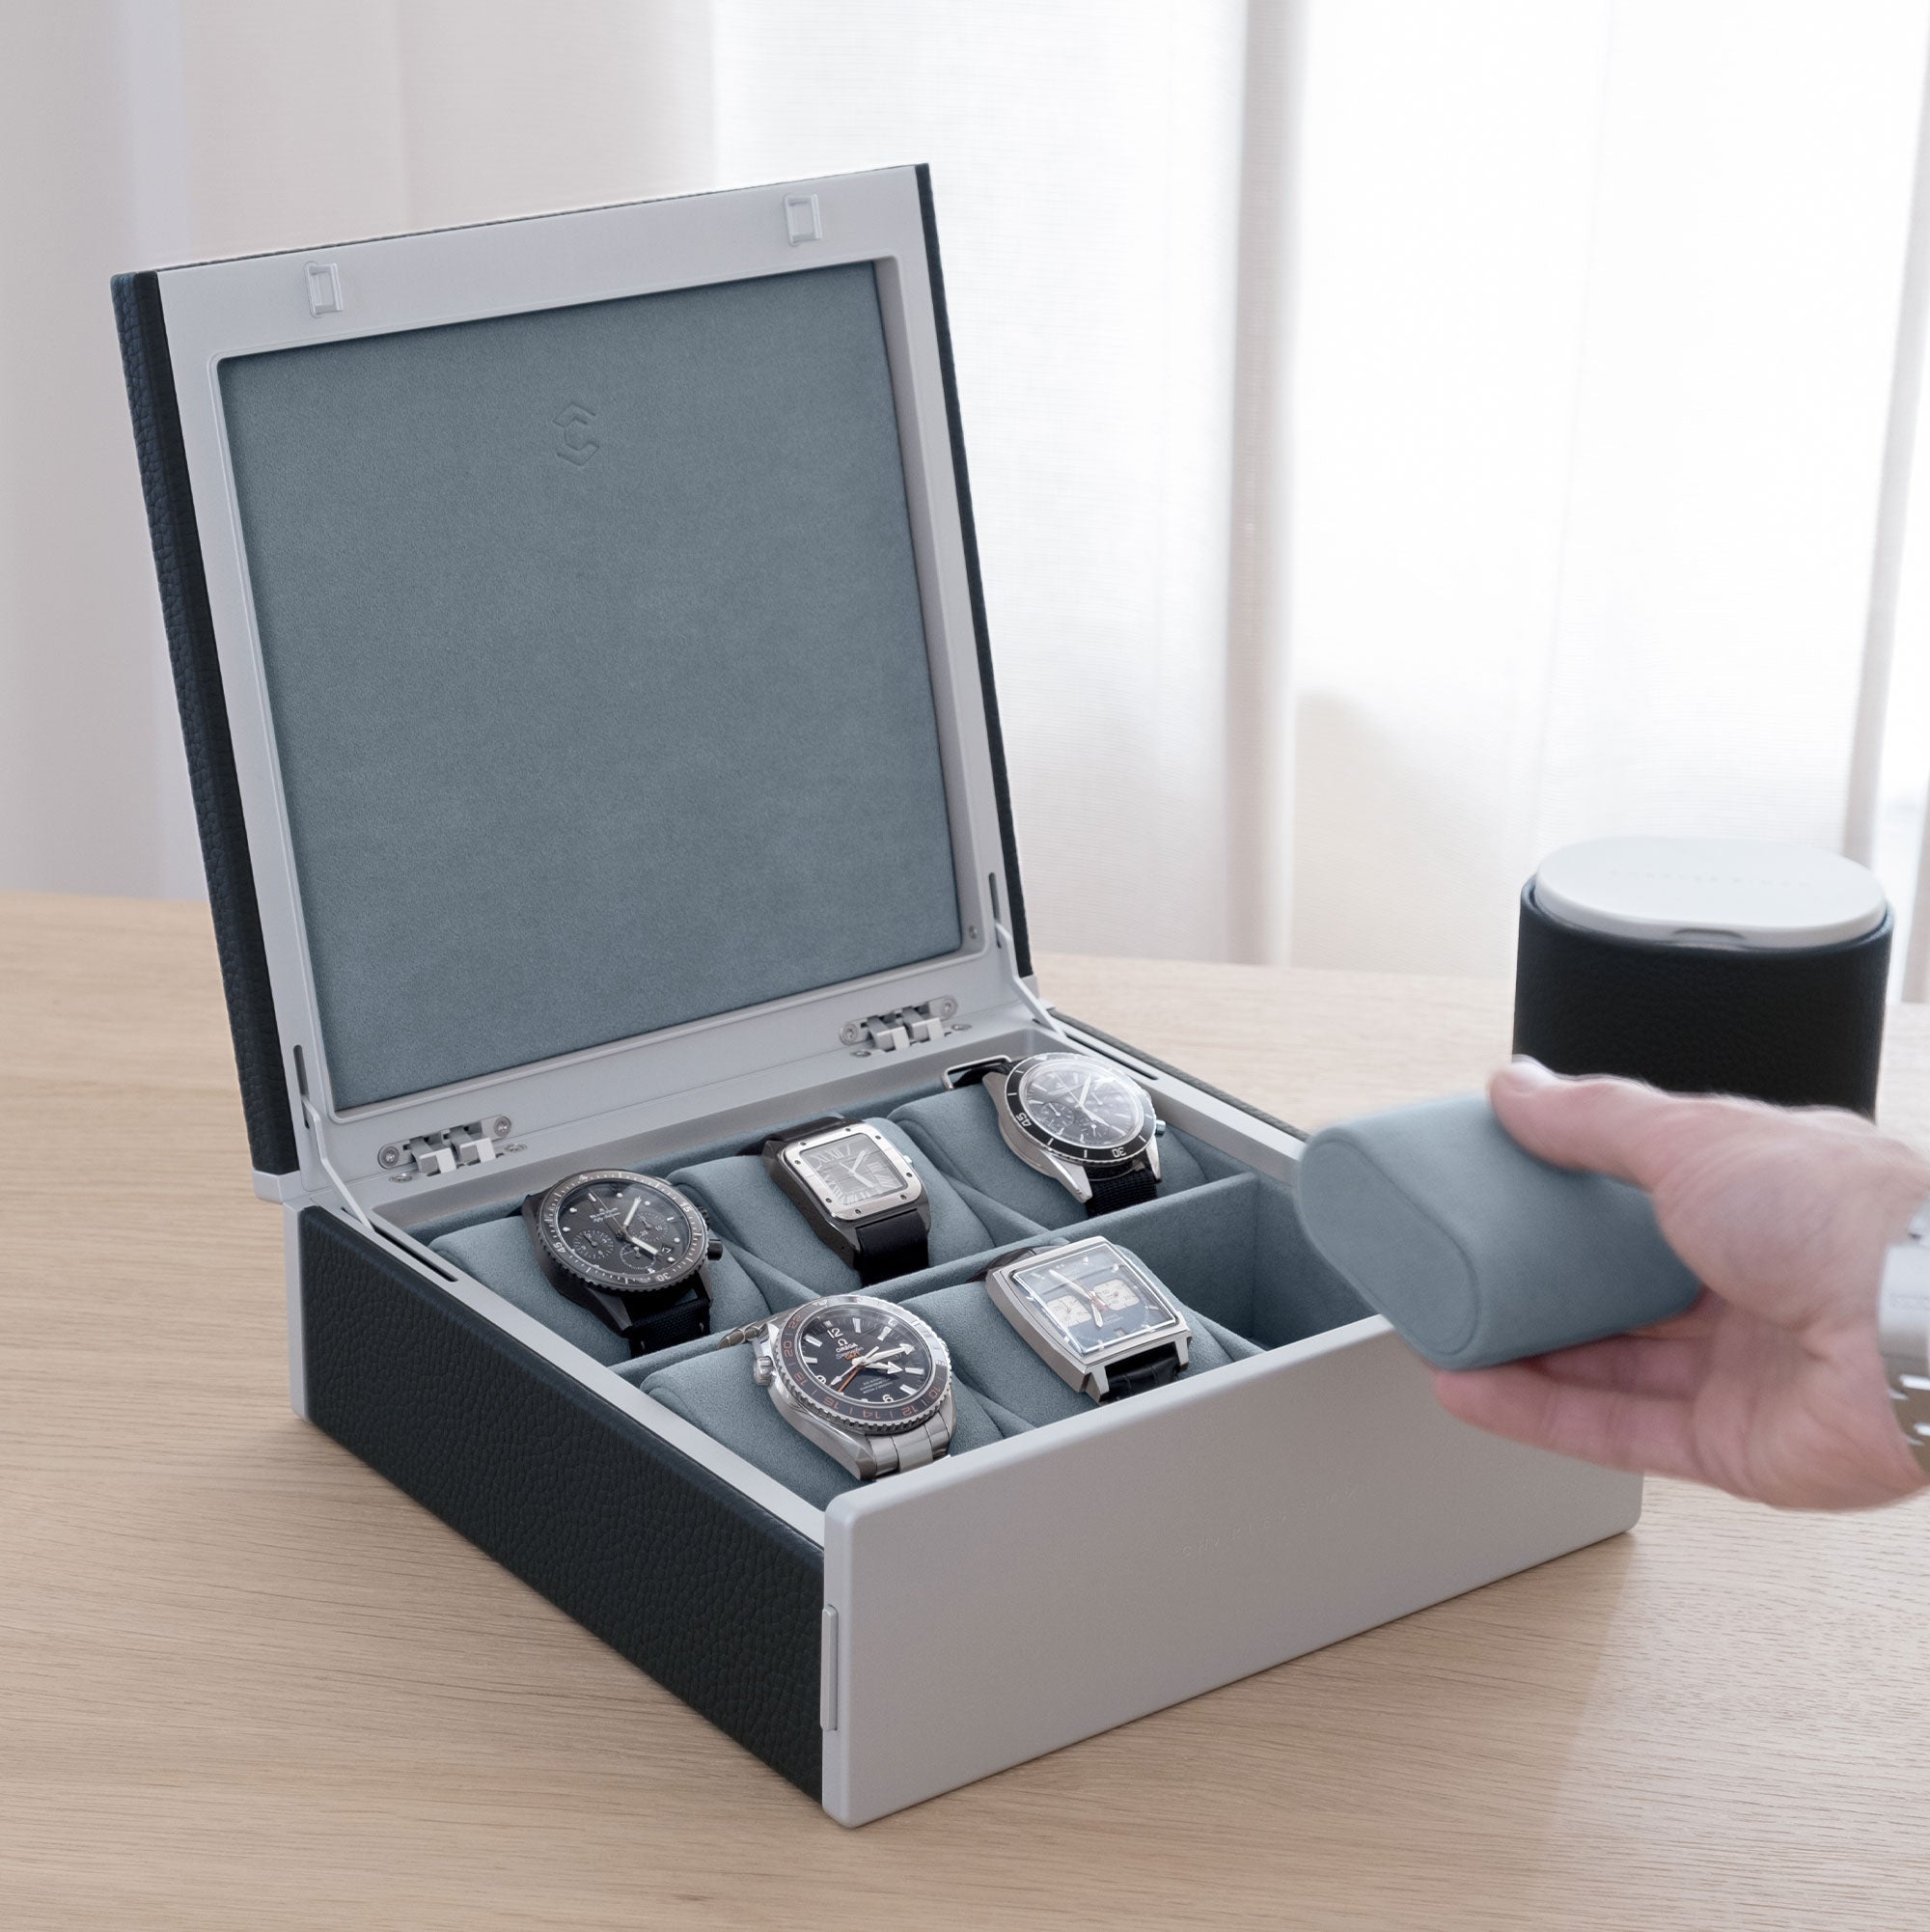 Luxury lifestyle shot of marine leather Spence watch box for 6 watches filled with men's luxury watches including Rolex, IWC, Jaeger Lecoultre, Cartier and Omega. Gentleman is taking removable Alcantara cushion from the smoky blue interior of the Spence watch box.